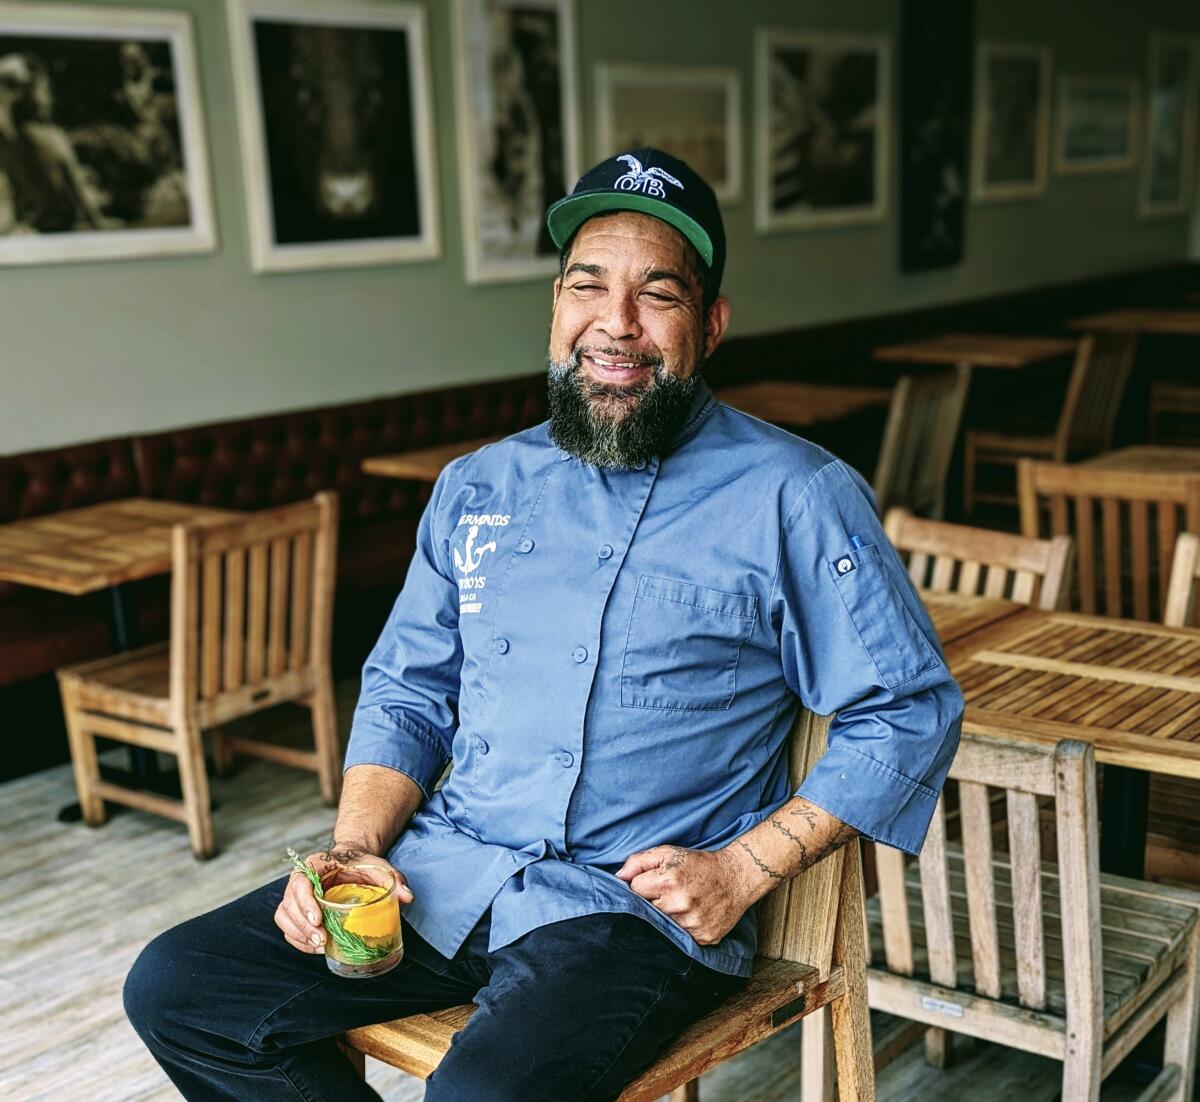 Mermaids & Cowboys executive chef Erik Freshley grew up learning how to grow and make his own food.